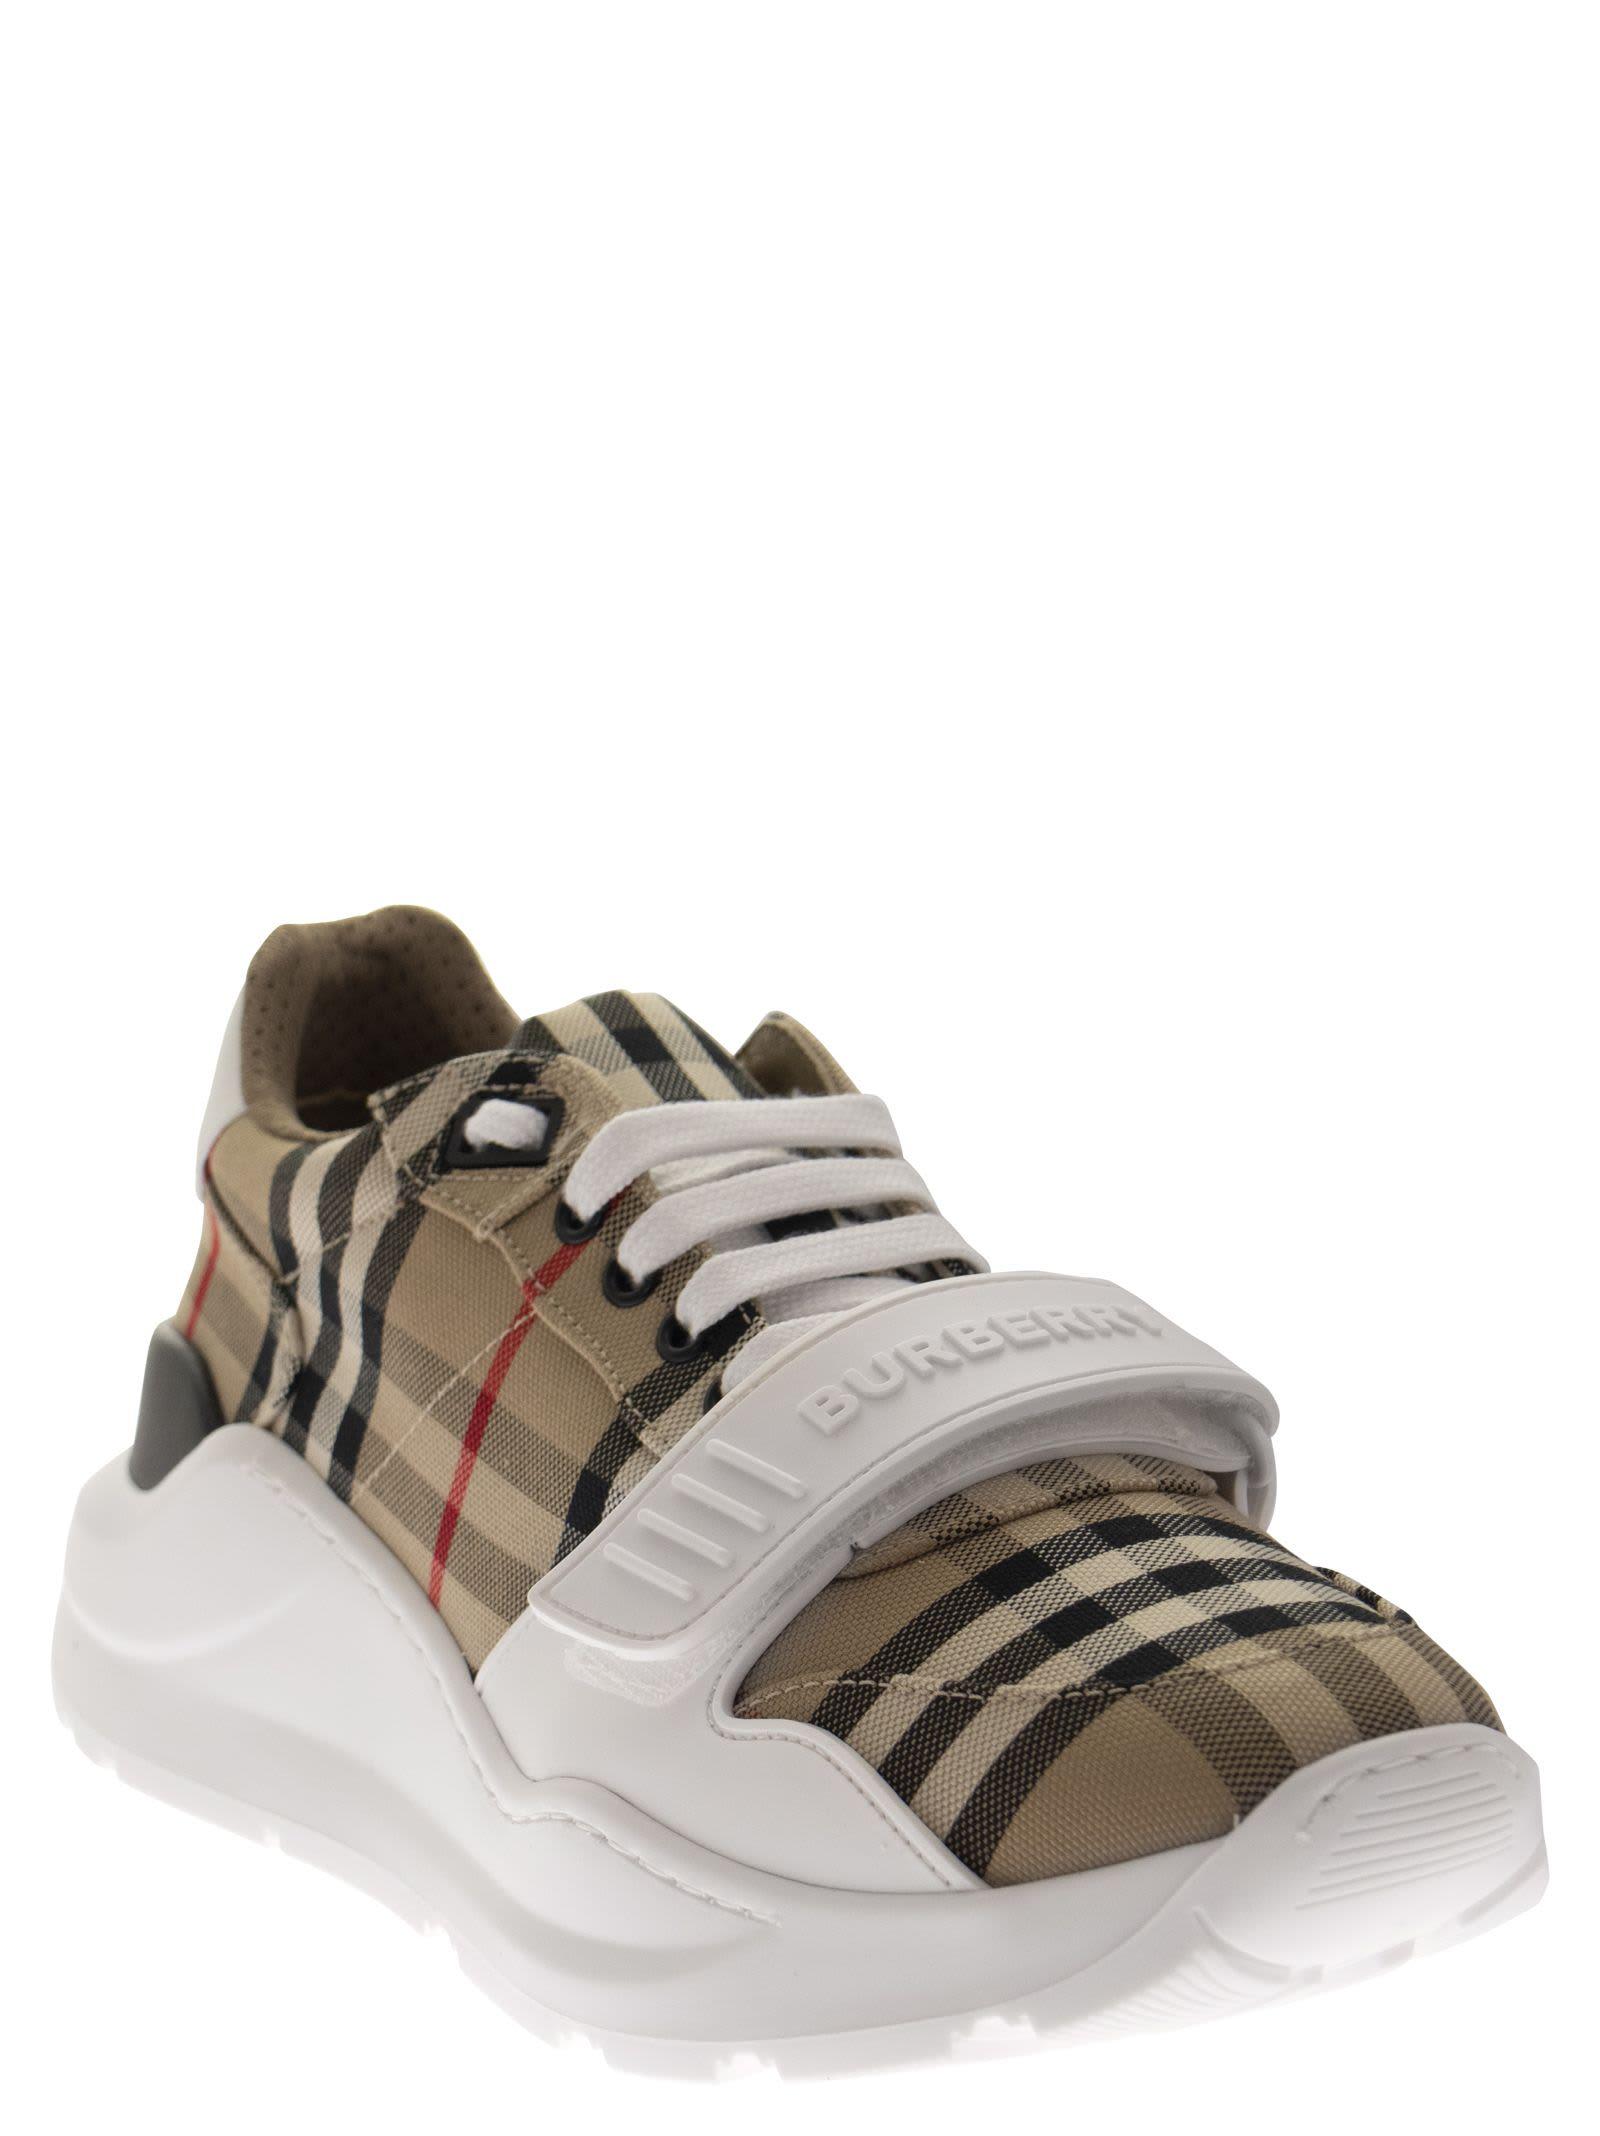 Burberry Leather New Regis - Sneakers - Save 46% | Lyst